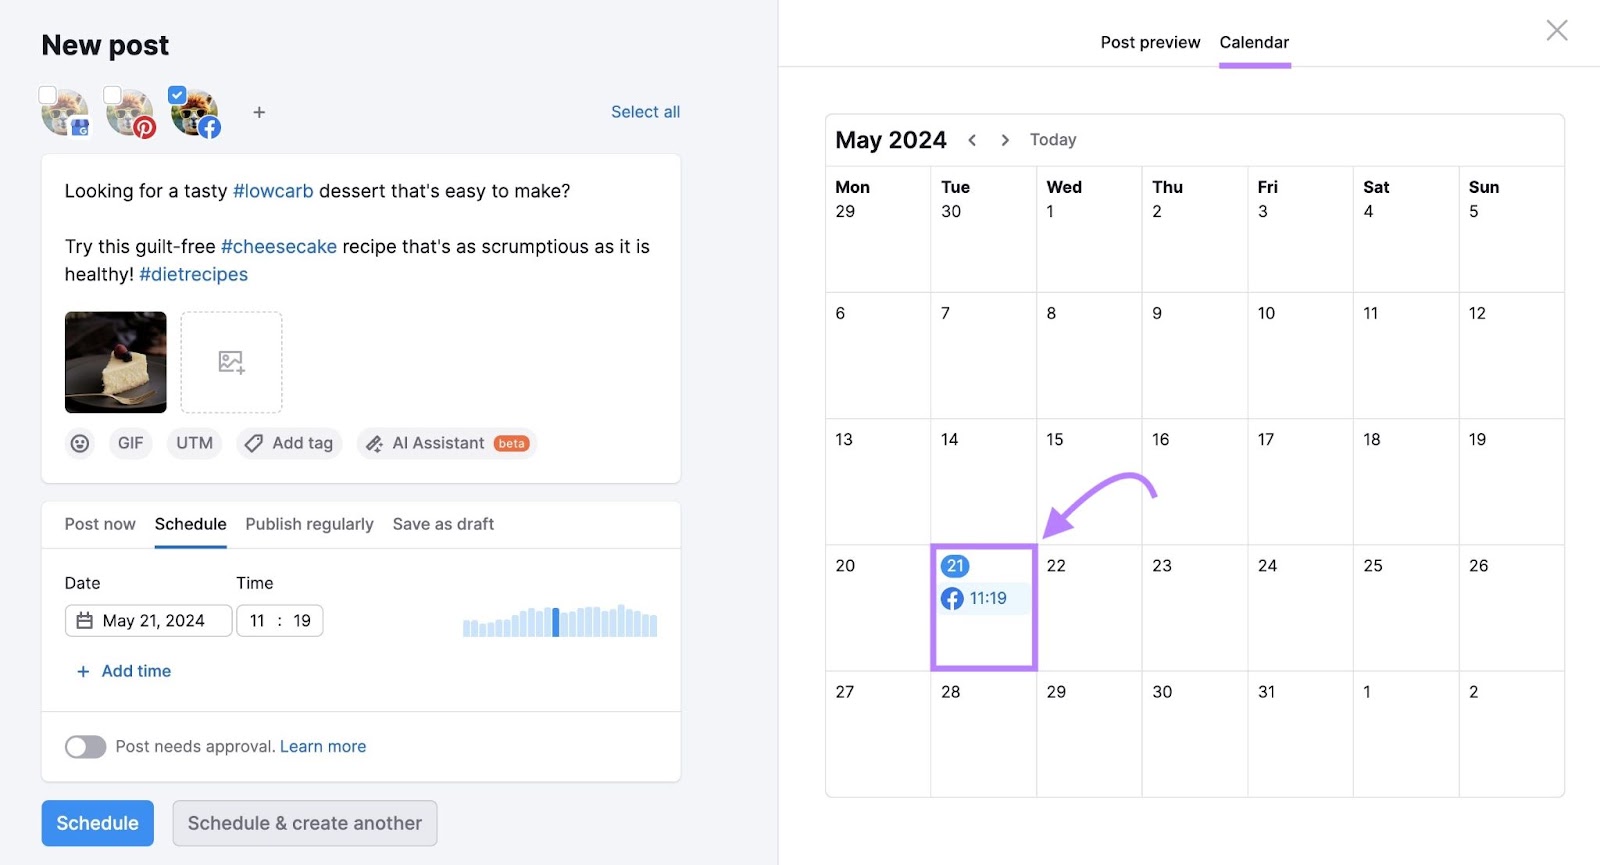 "New post" page on "Social Poster" with the "Calendar" preview tab clicked on the right-hand side.